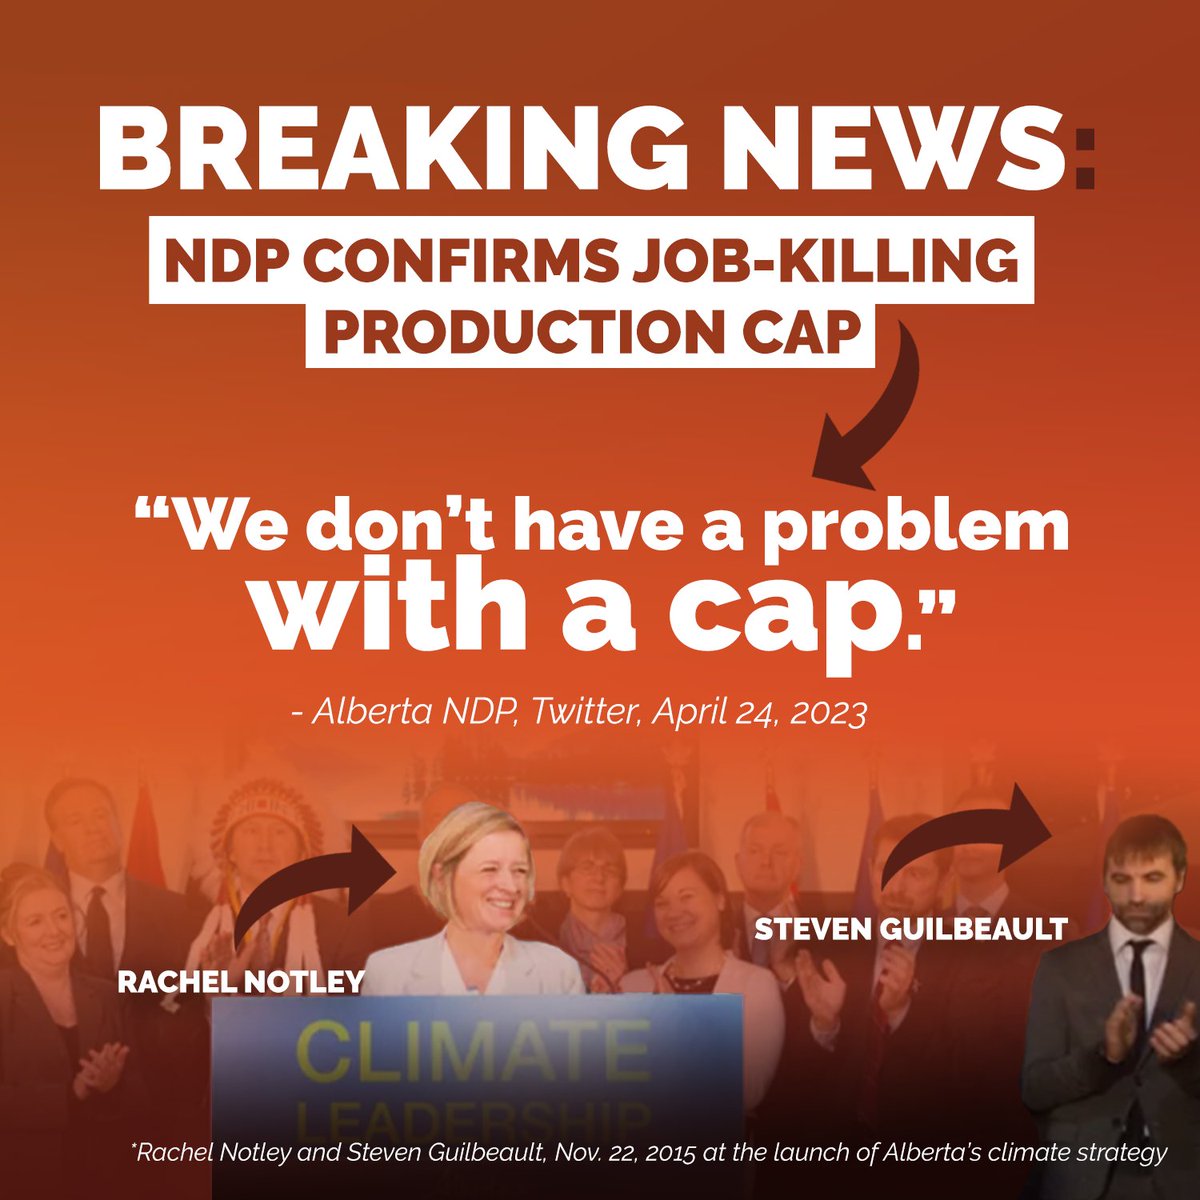 Rachel Notley has confirmed that she plans to bring in a job-killing production cap on Alberta's energy industry. Is it any wonder why Steven Guilbeault was such a fan of her climate plan? #ableg #abvote #abenergy #yyc